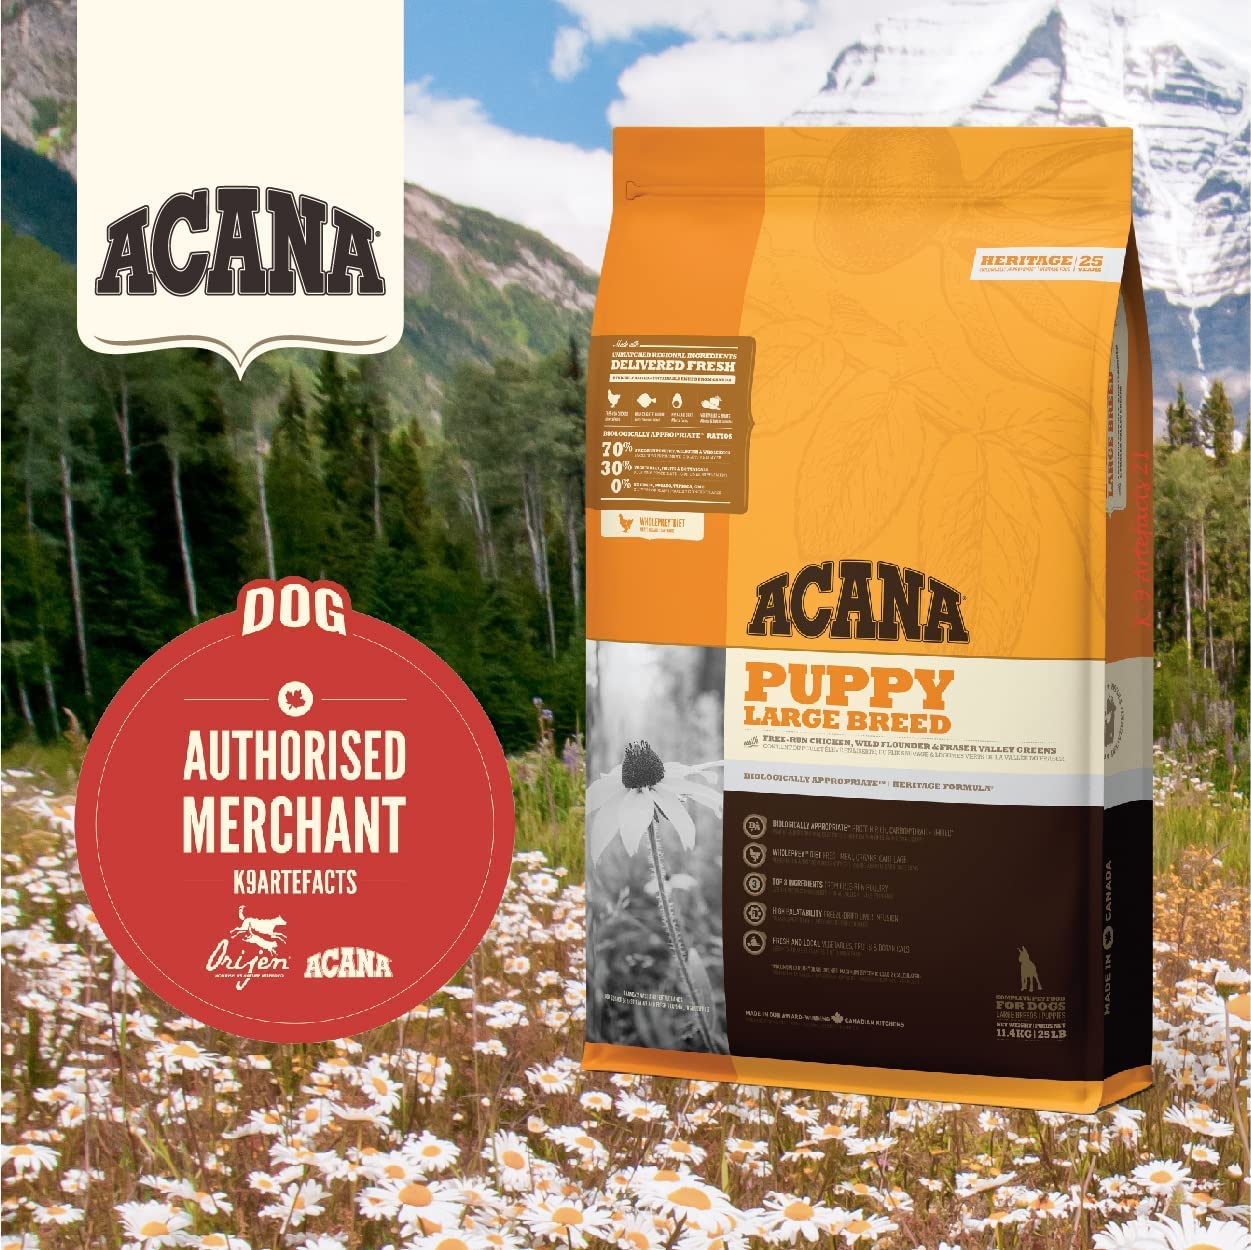 Acana Dog Food for Puppy Large Breed